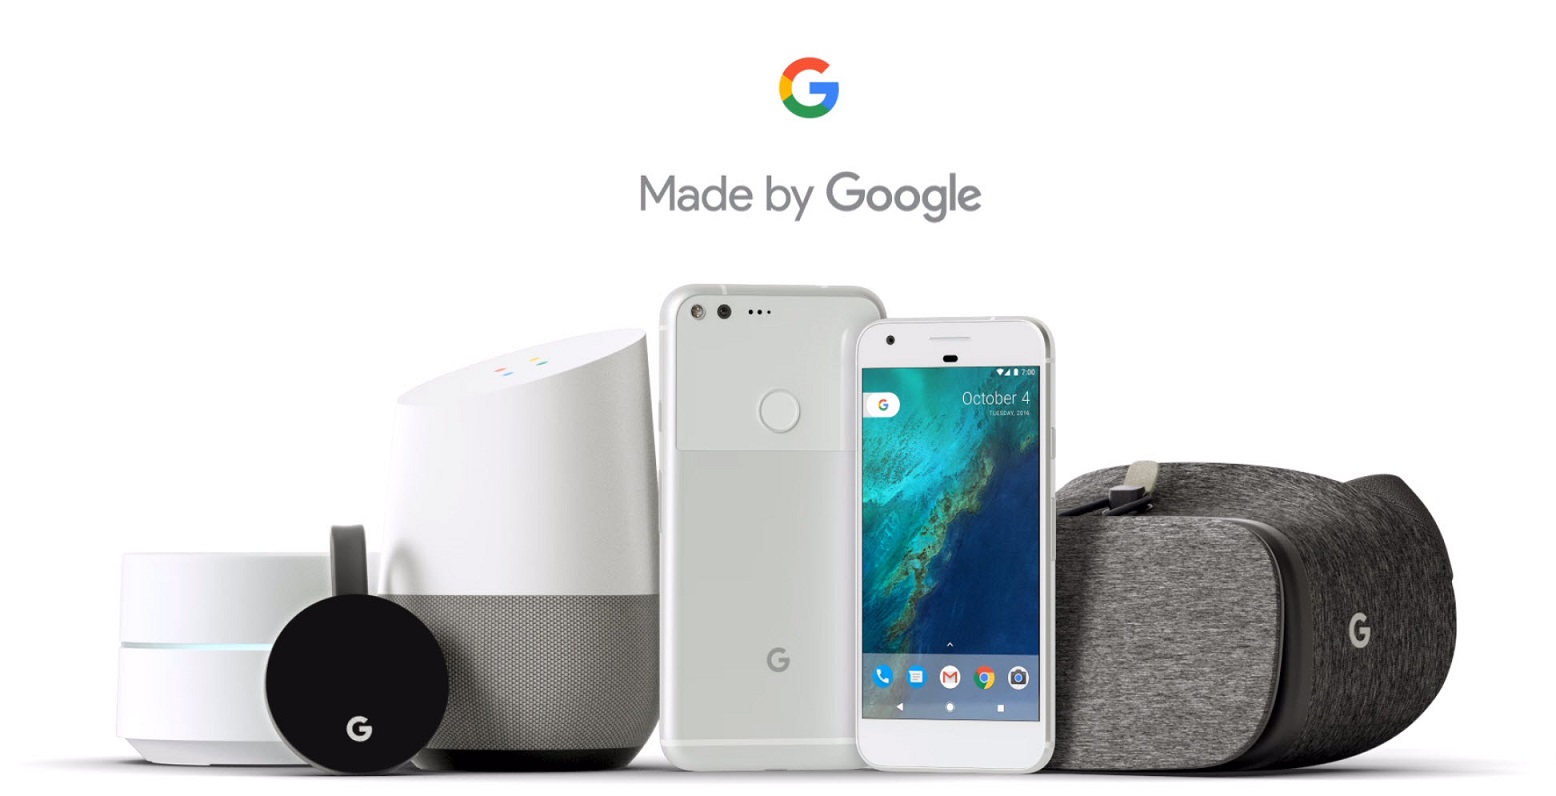 Google Announces Pixel, Pixel XL, Daydream, Chromecast Ultra, Wifi, Home at Made by Google Event